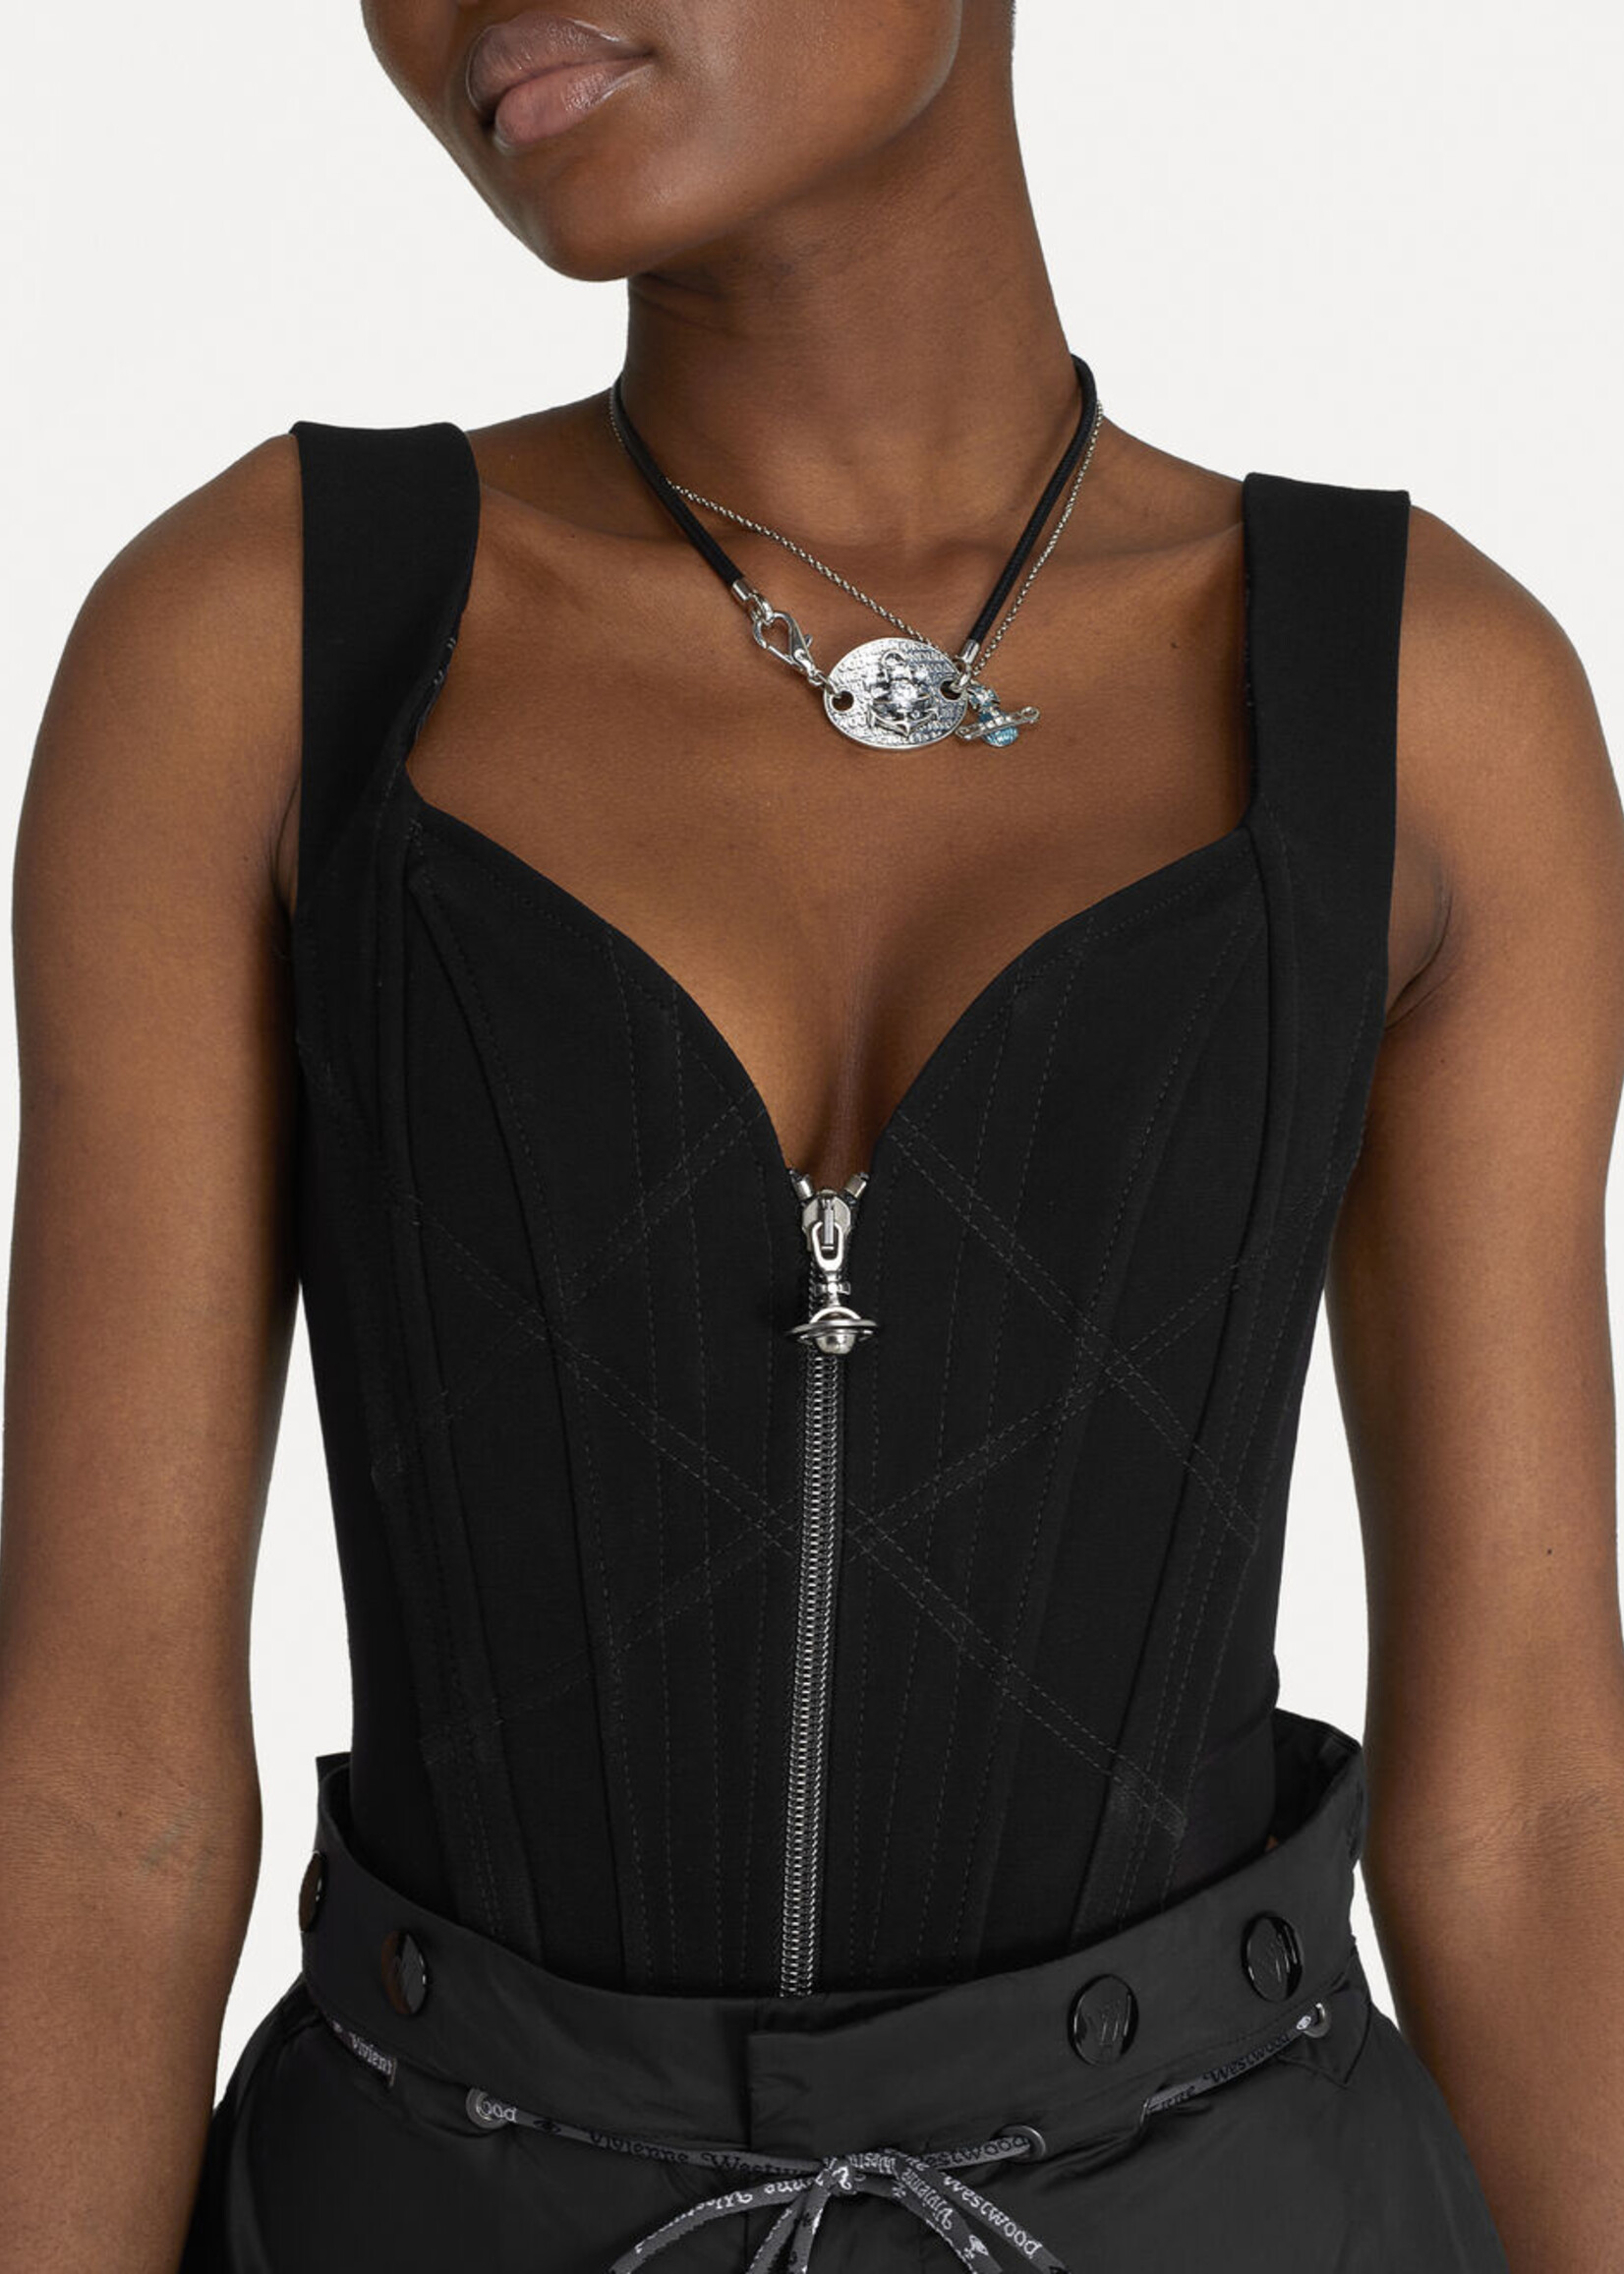 VIVIENNE WESTWOOD Classic Corset with Zip Front in Black